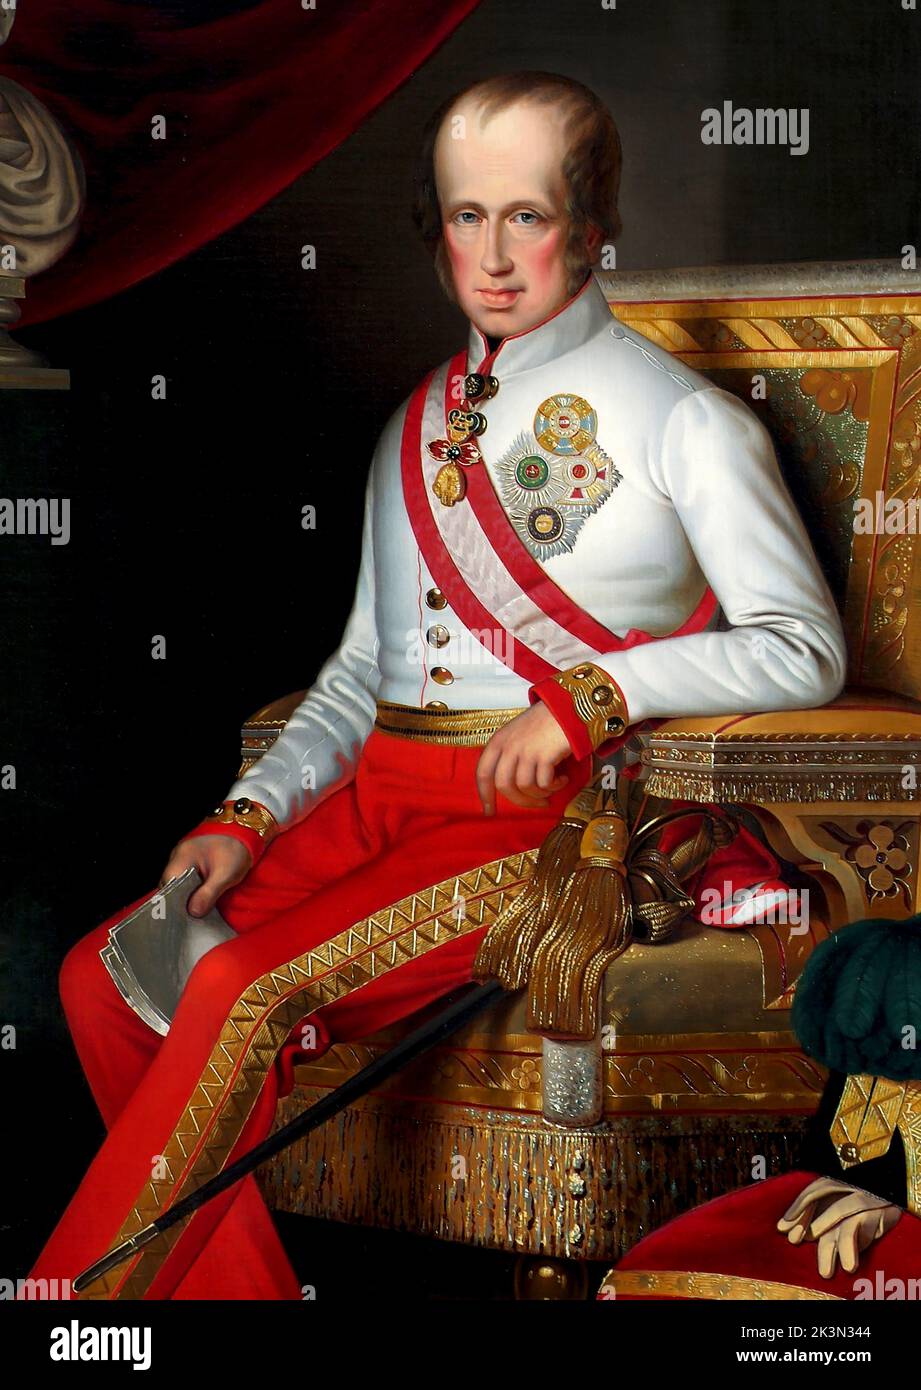 Emperor Ferdinand I of Austria (1793-1875)  Eduard Edlinger  Ferdinand I (German: Ferdinand I. 19 April 1793 – 29 June 1875) was the Emperor of Austria from March 1835 until his abdication in December 1848. He was also King of Hungary, Croatia and Bohemia (as Ferdinand V), King of Lombardy–Venetia and holder of many other lesser titles (see grand title of the Emperor of Austria). Due to his rocky, passive but well-intentioned character, he gained the sobriquet The Benign (German: Der Gütige) or The Benevolent (Czech: Ferdinand Dobrotivý, Polish: Ferdynand Dobrotliwy).[2] Stock Photo